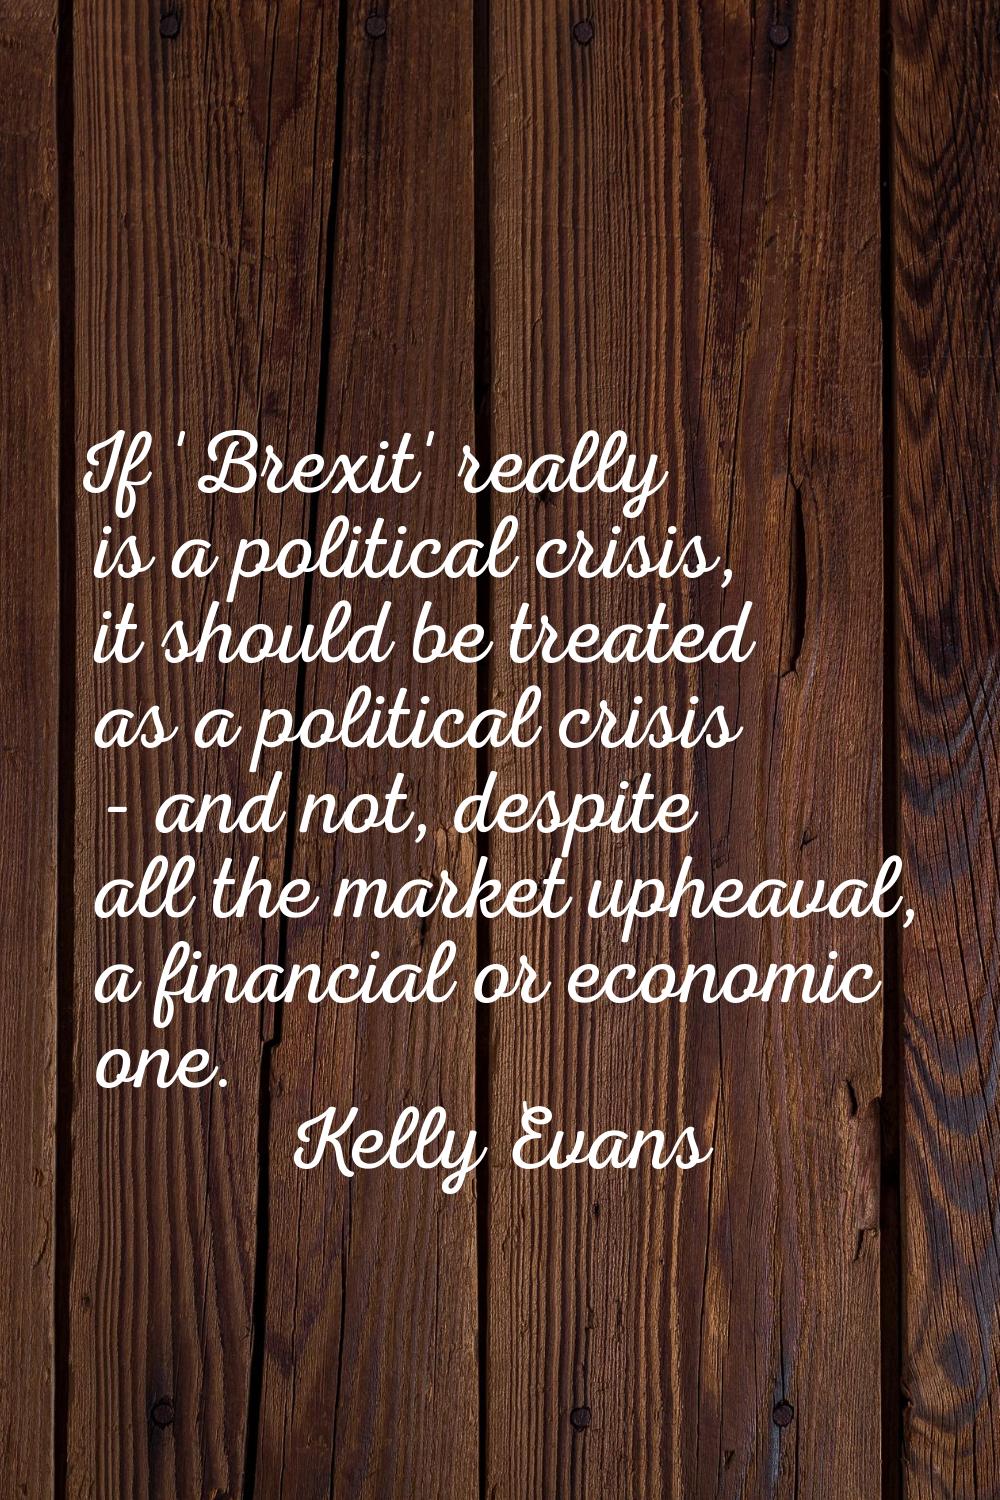 If 'Brexit' really is a political crisis, it should be treated as a political crisis - and not, des